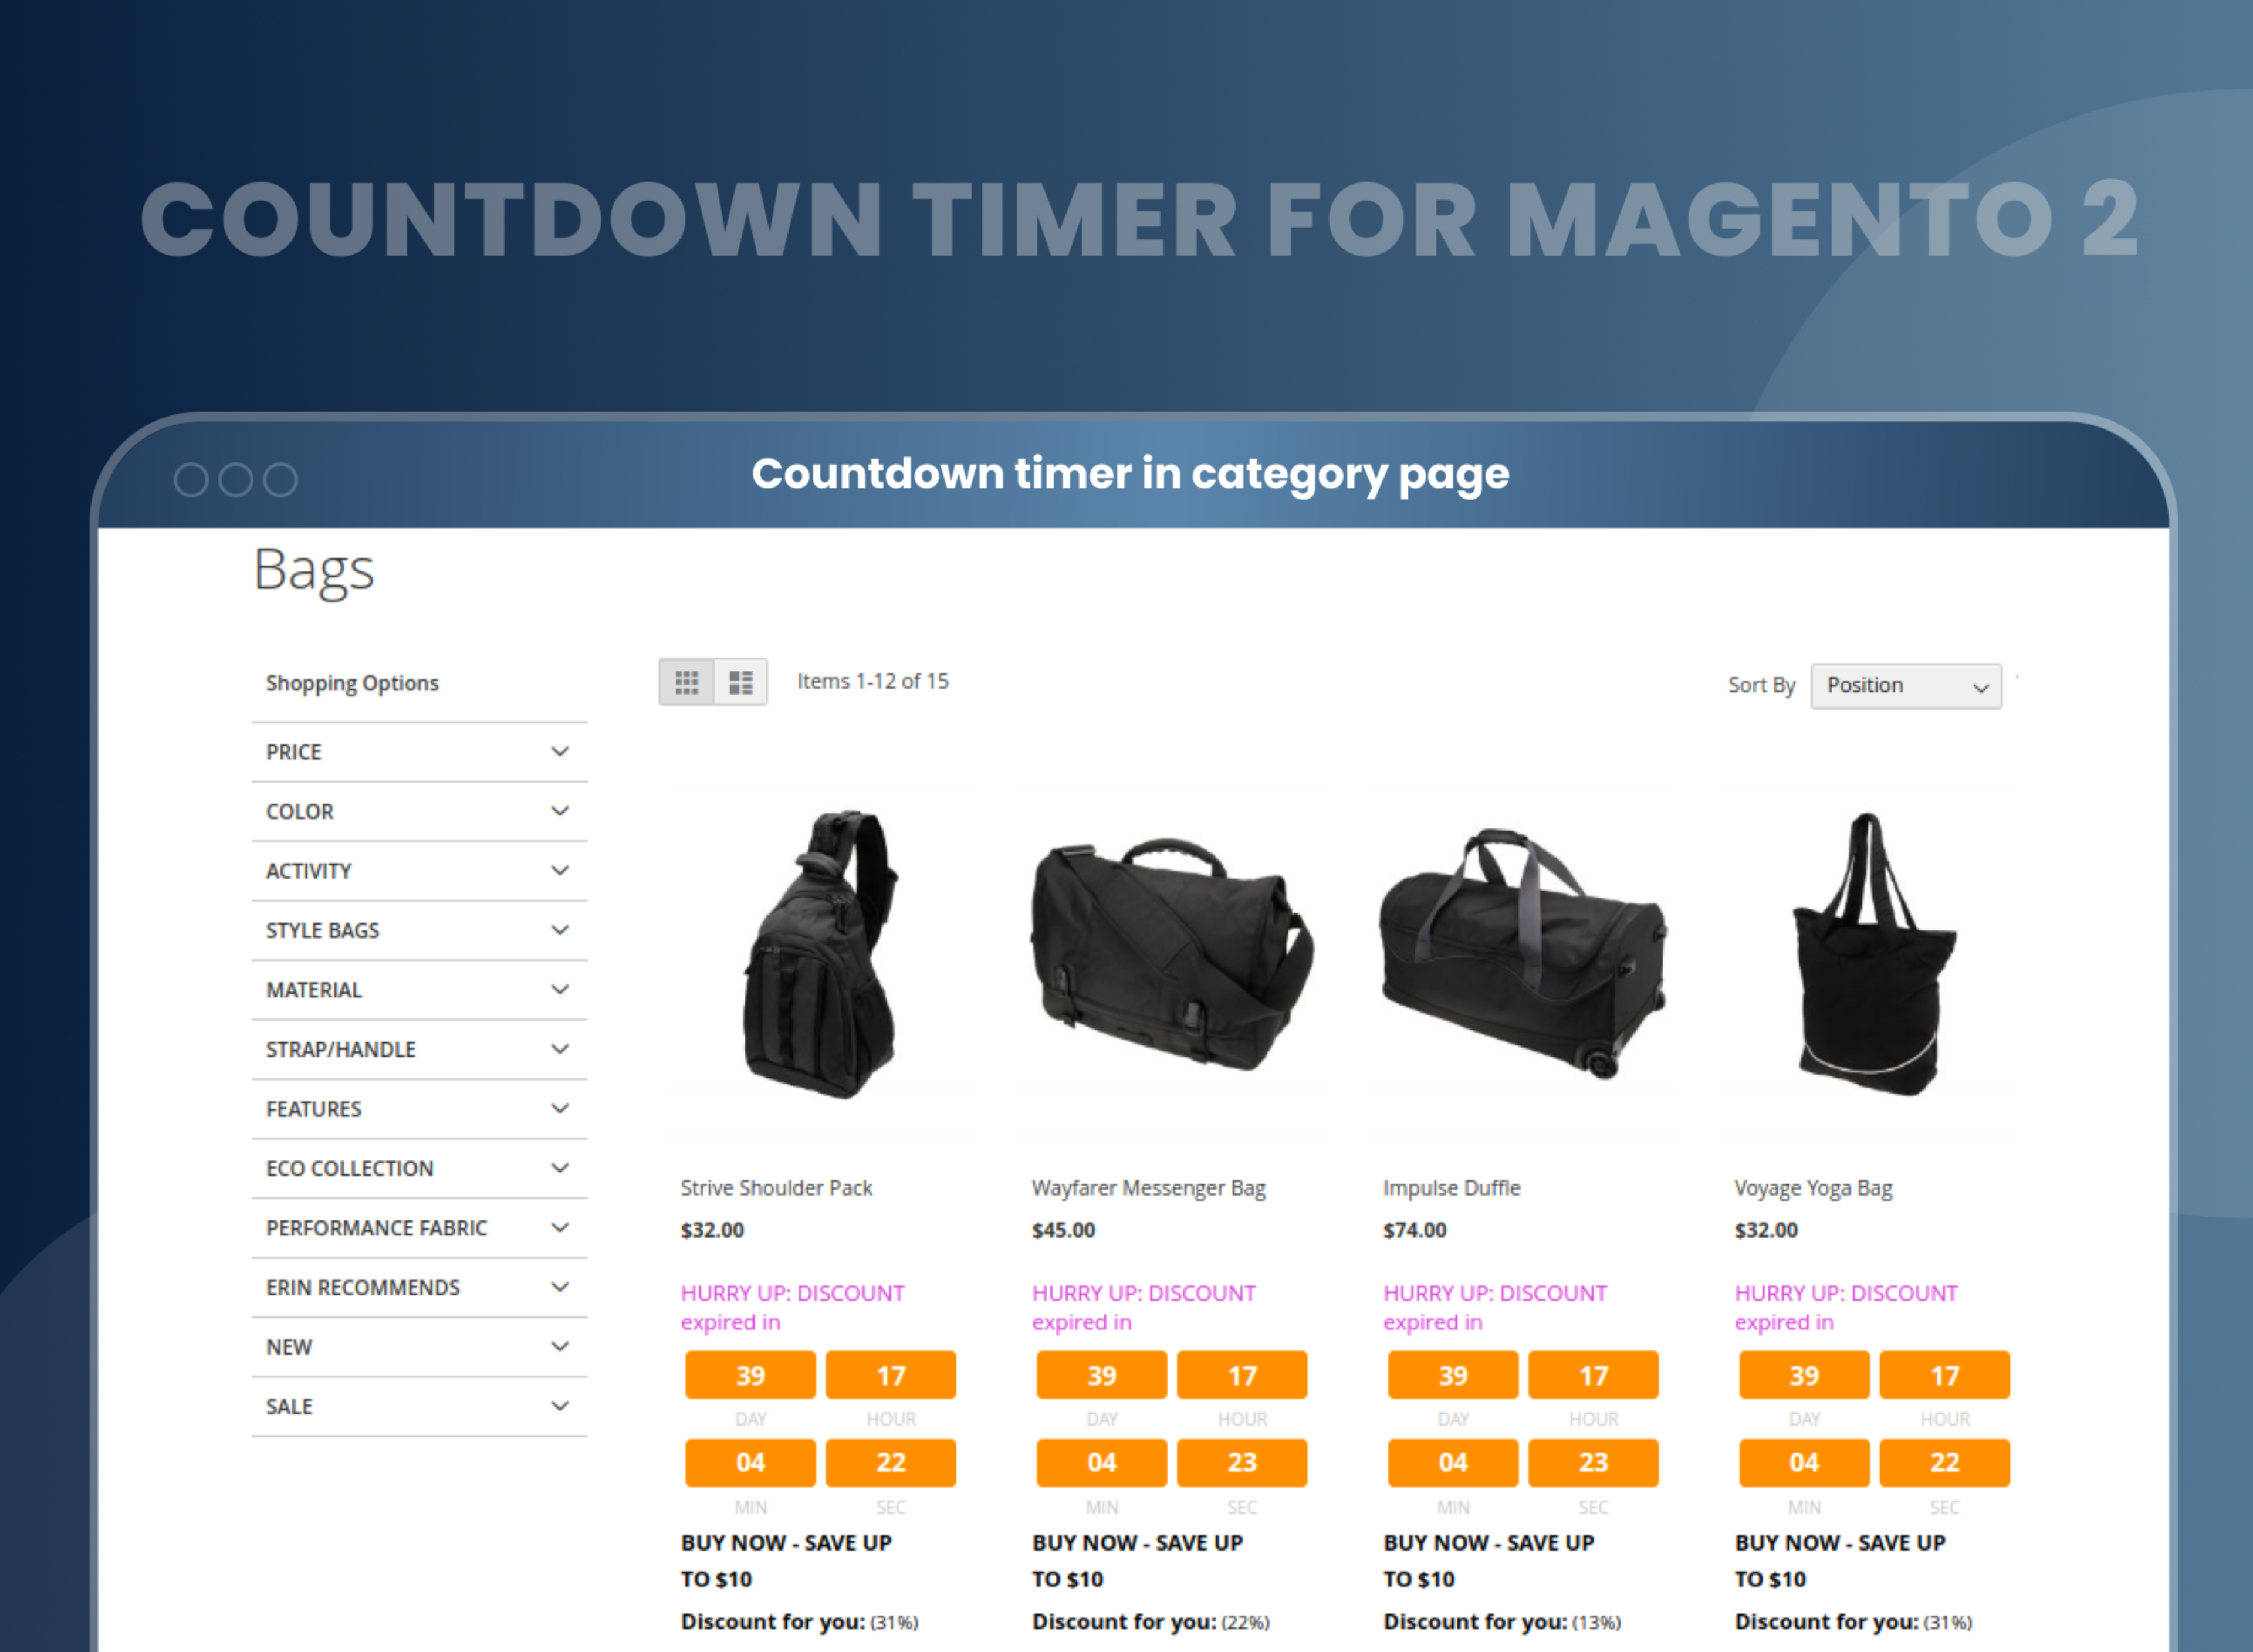 Countdown timer in category page